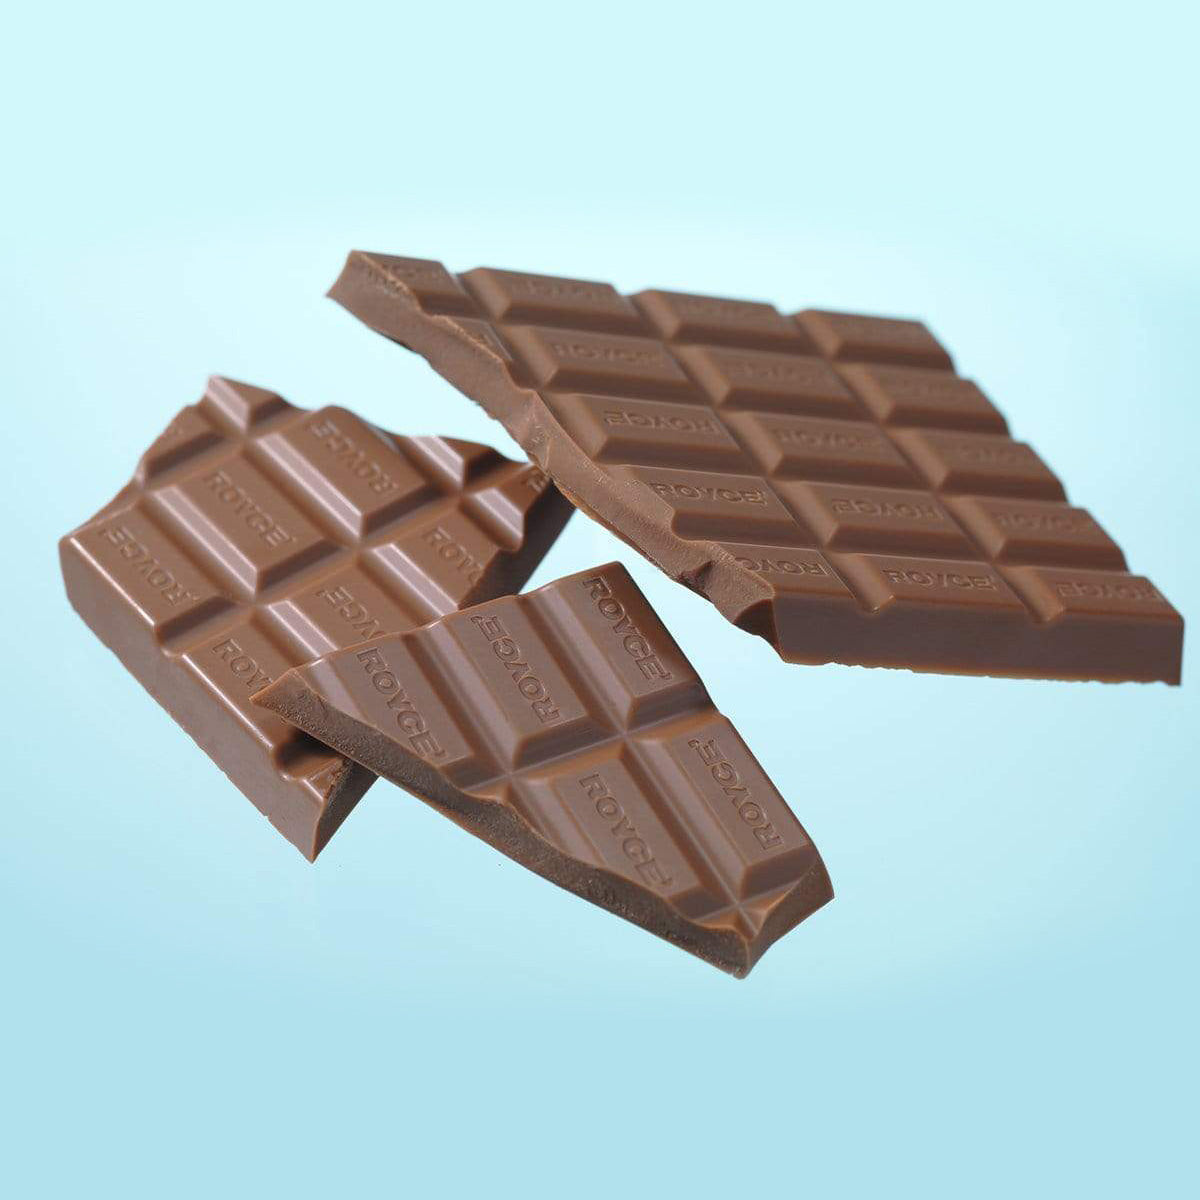 ROYCE' Chocolate - Chocolate Bar "Creamy Milk" - Image shows two brown chocolate bars with the word "ROYCE'" engraved. Background is in blue.